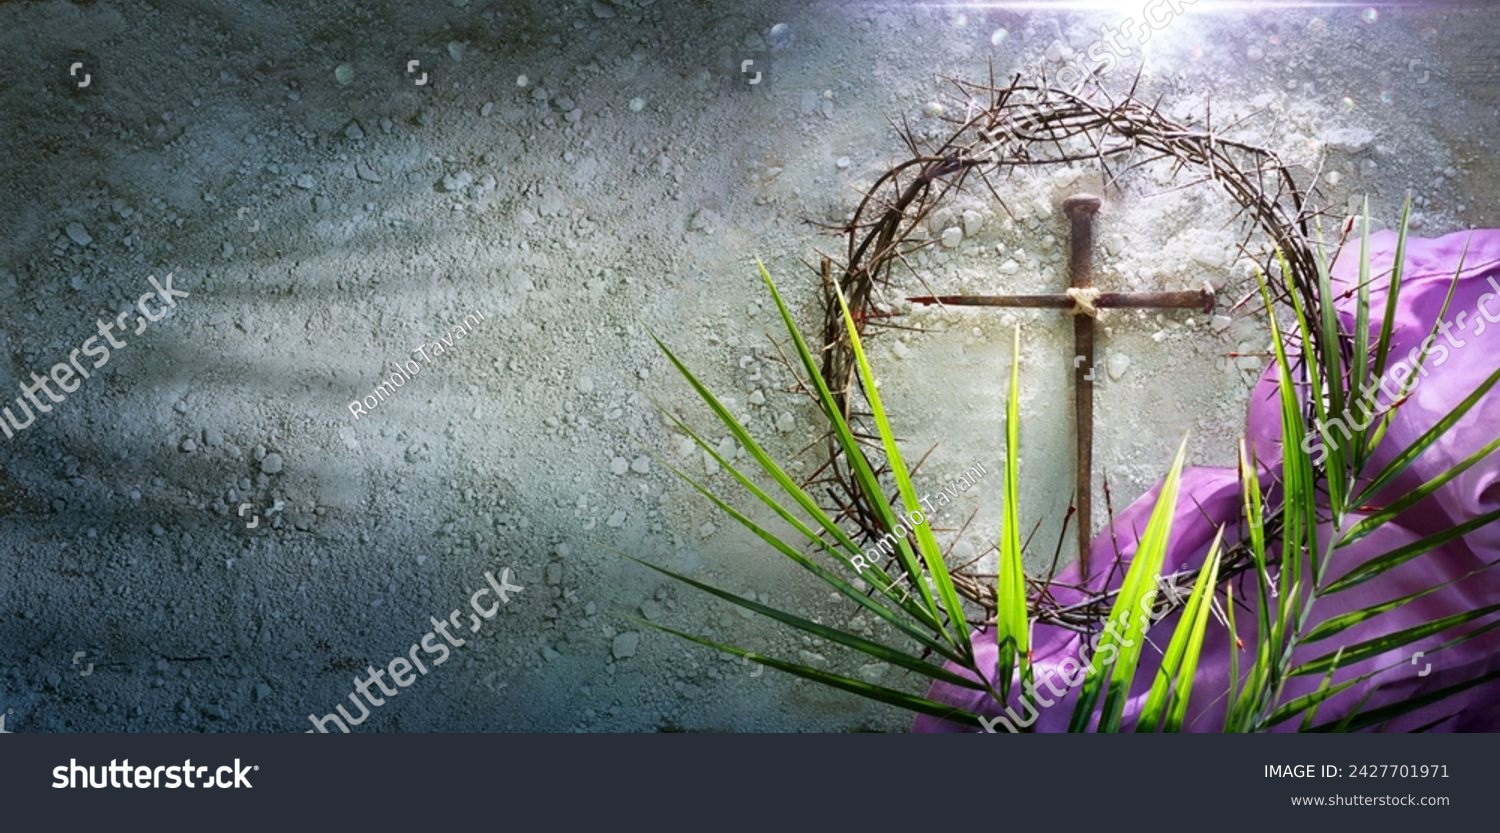 Lenten -  Crown Of Thorns and Cross With Purple Robe On Ash - Palm Leaves And Bloody Spikes For Penitence Concept With Abstract Sunlight #2427701971